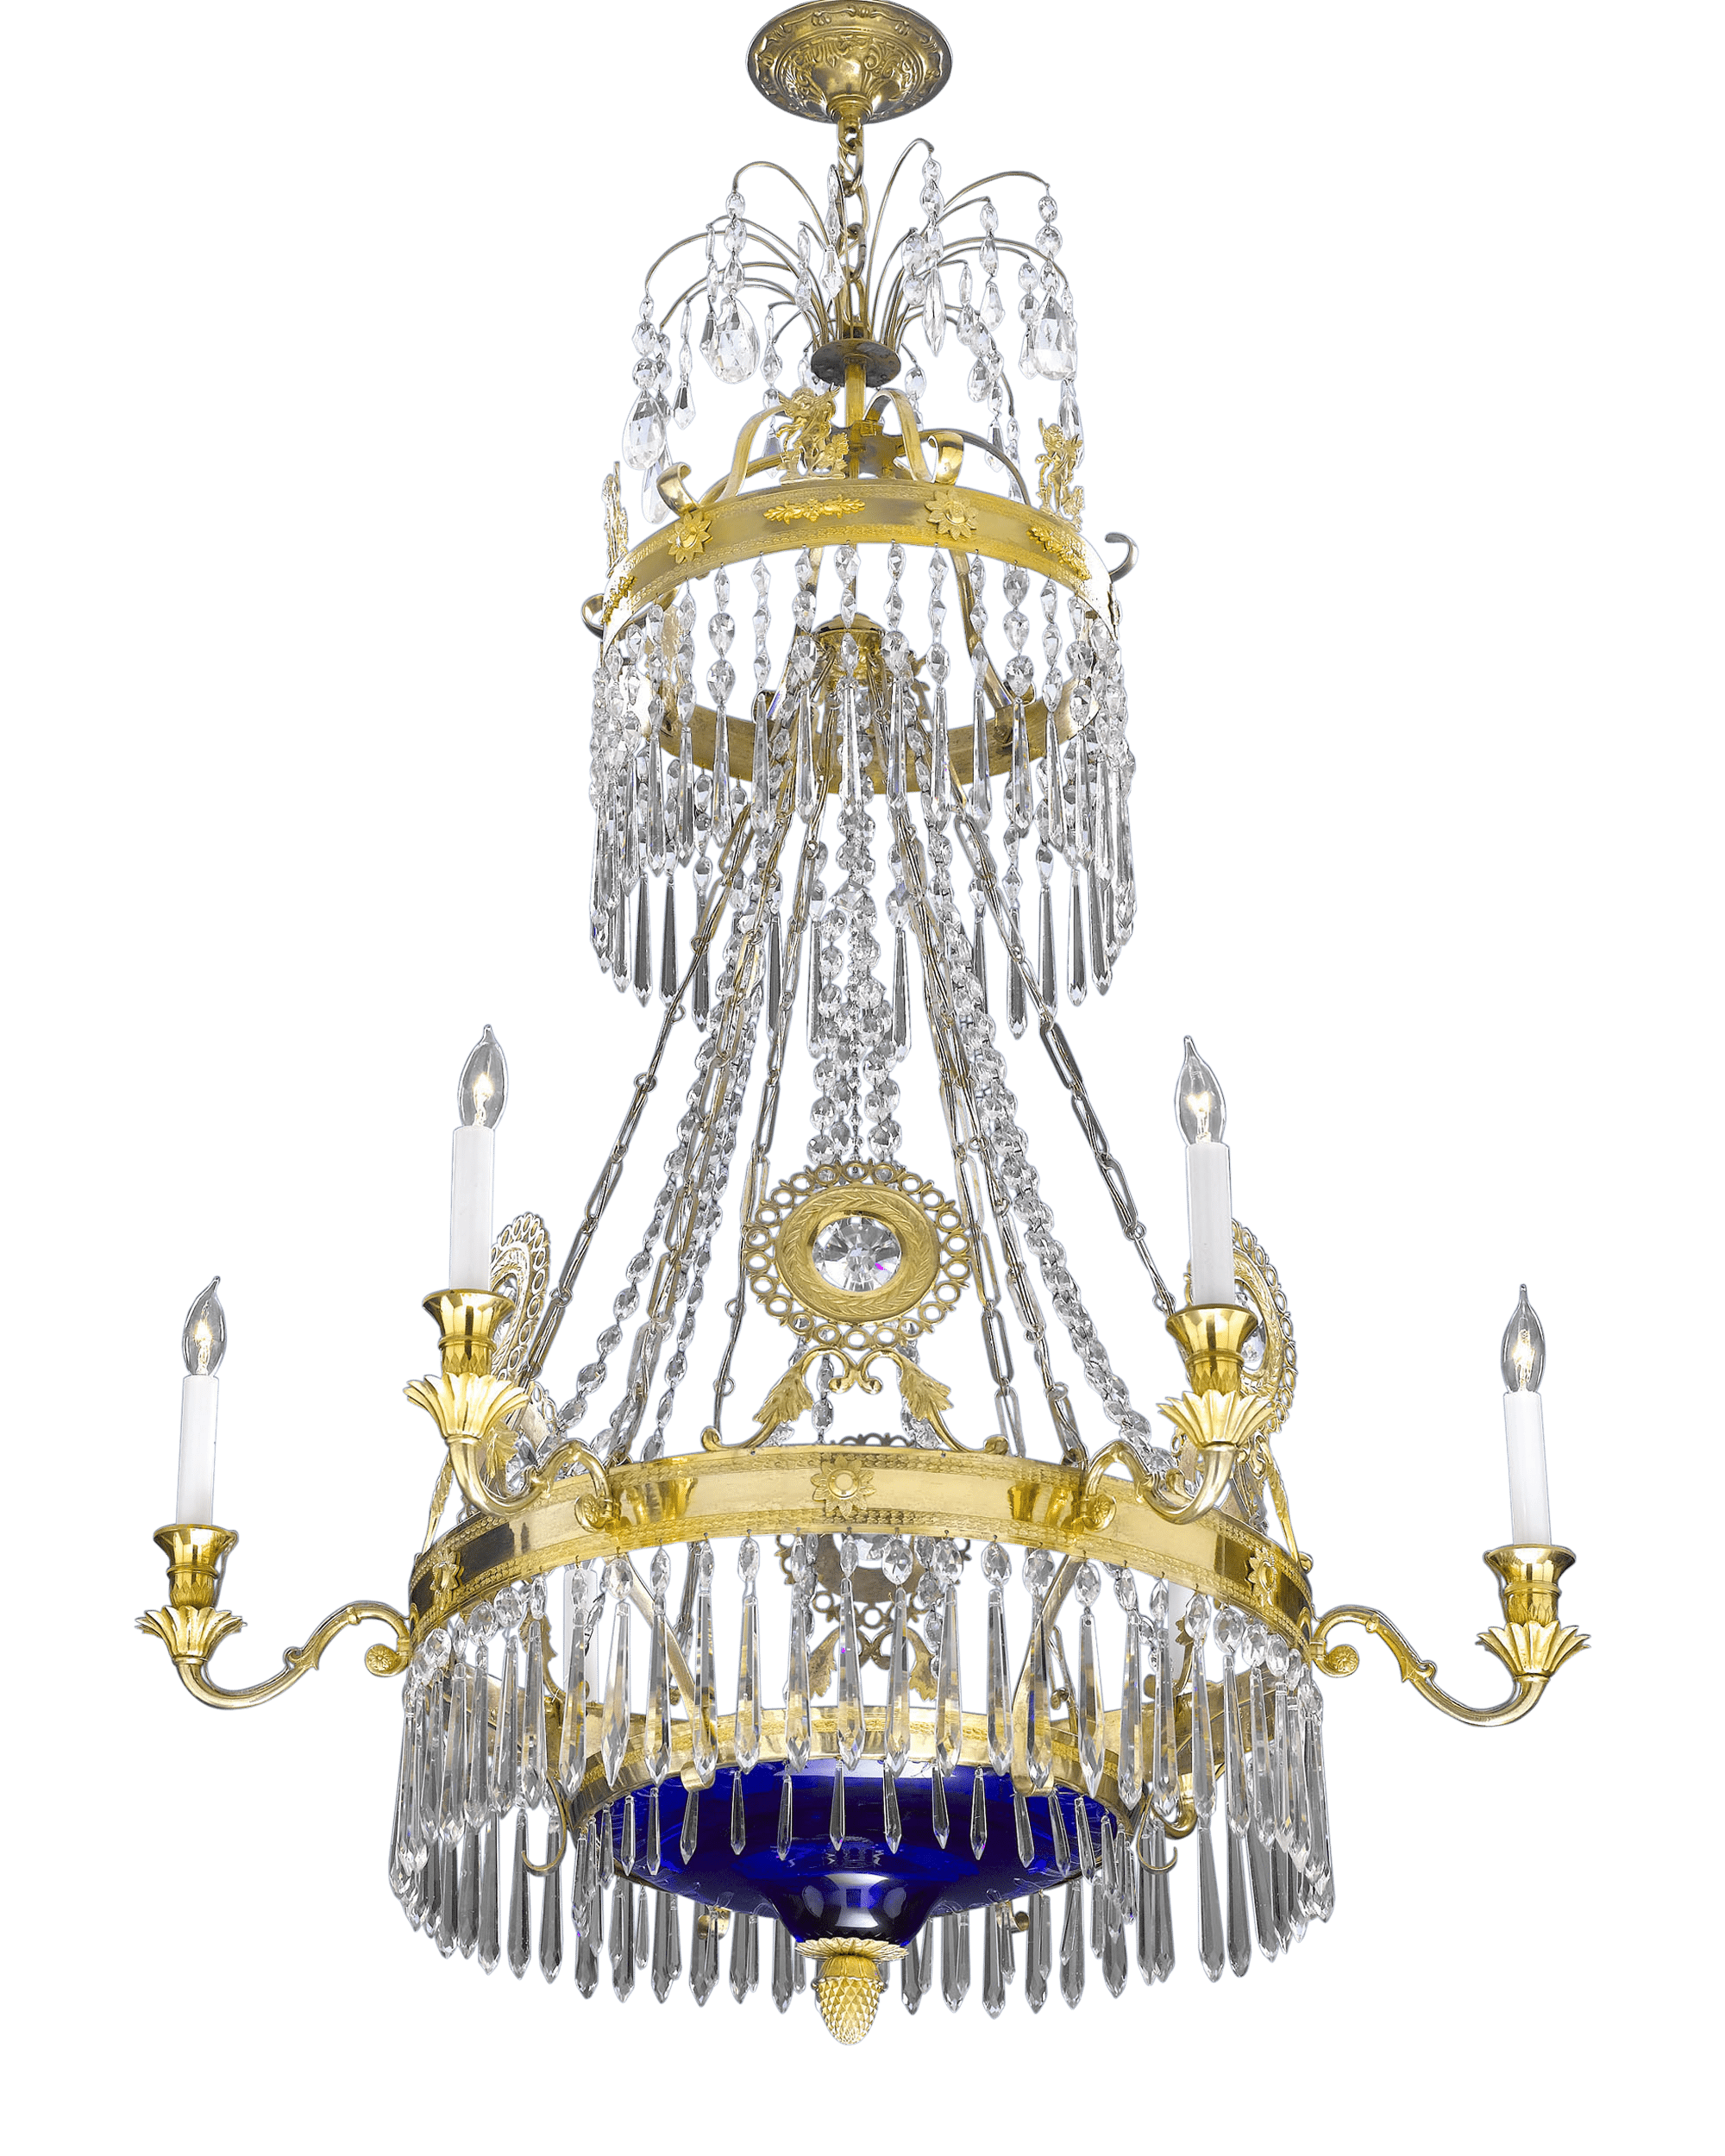 Accented with a central blue glass pendant, this chandelier radiates elegance